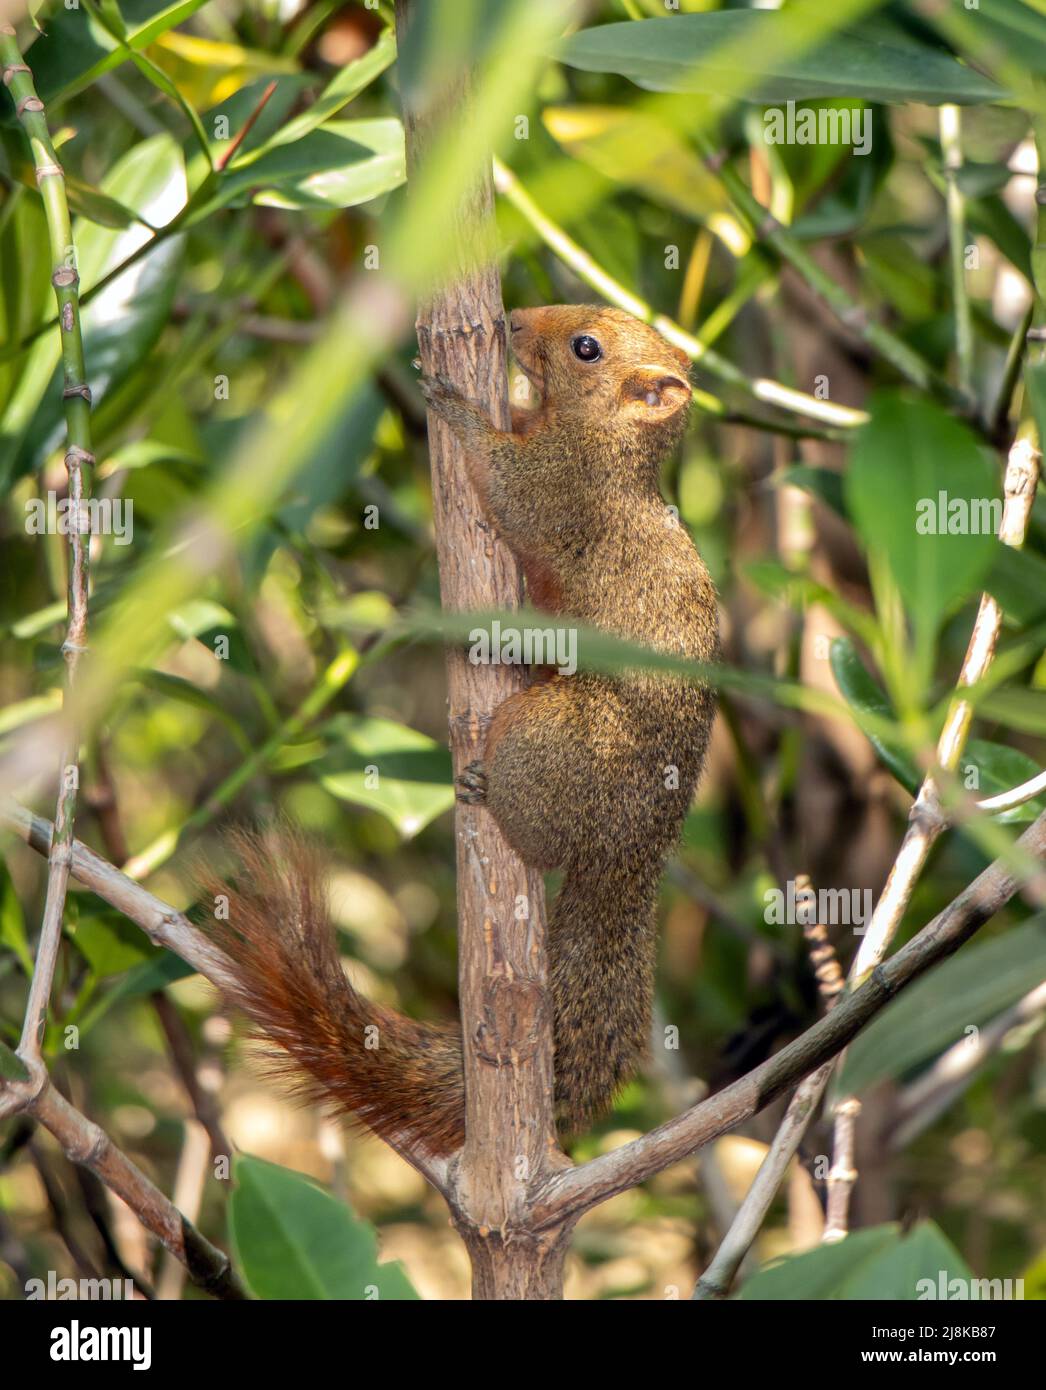 The red-bellied tree squirrel climbs on the tree. Pallas's squirrel (Callosciurus erythraeus) in a tropical nature, Thailand. Stock Photo